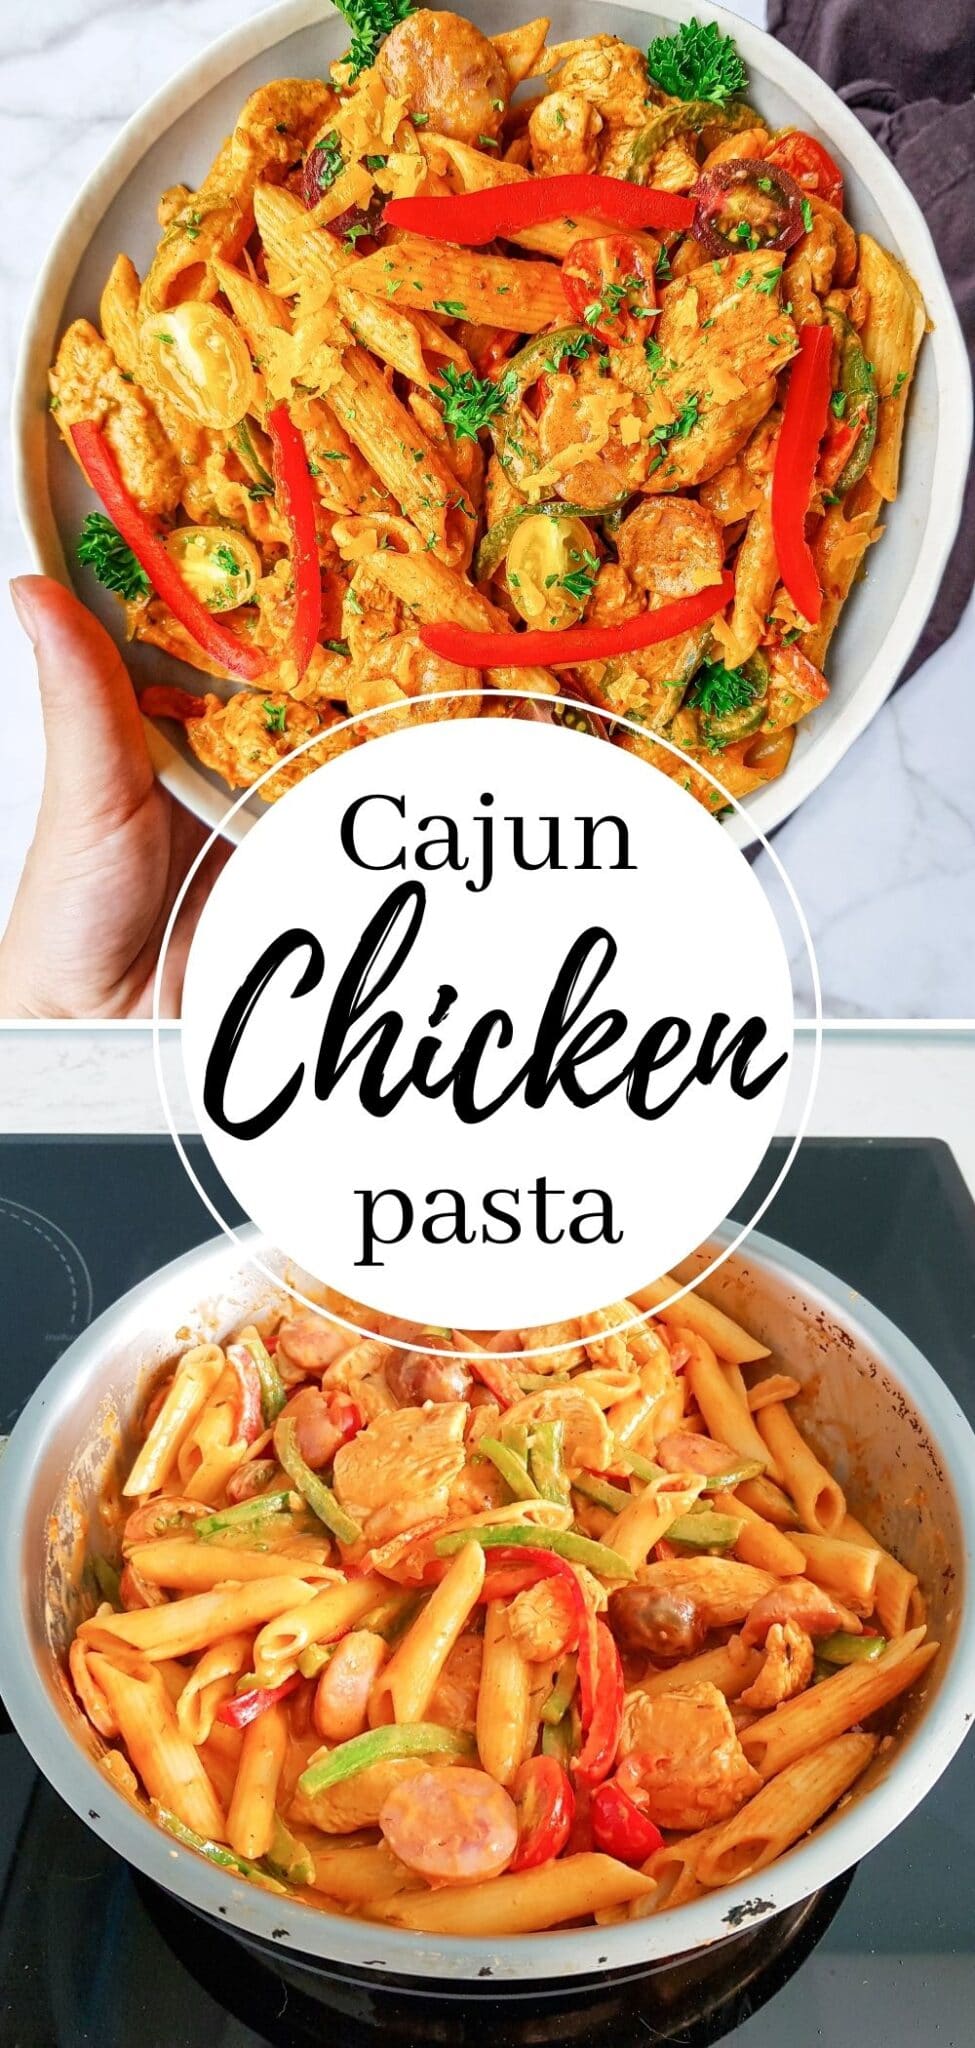 This Cajun Chicken Pasta Recipe is a flavorful, one-pan meal you can whip up in under half an hour. Perfect for busy weeknights! #cajun #chicken #pasta #onepotmeal via @wondermomwannab